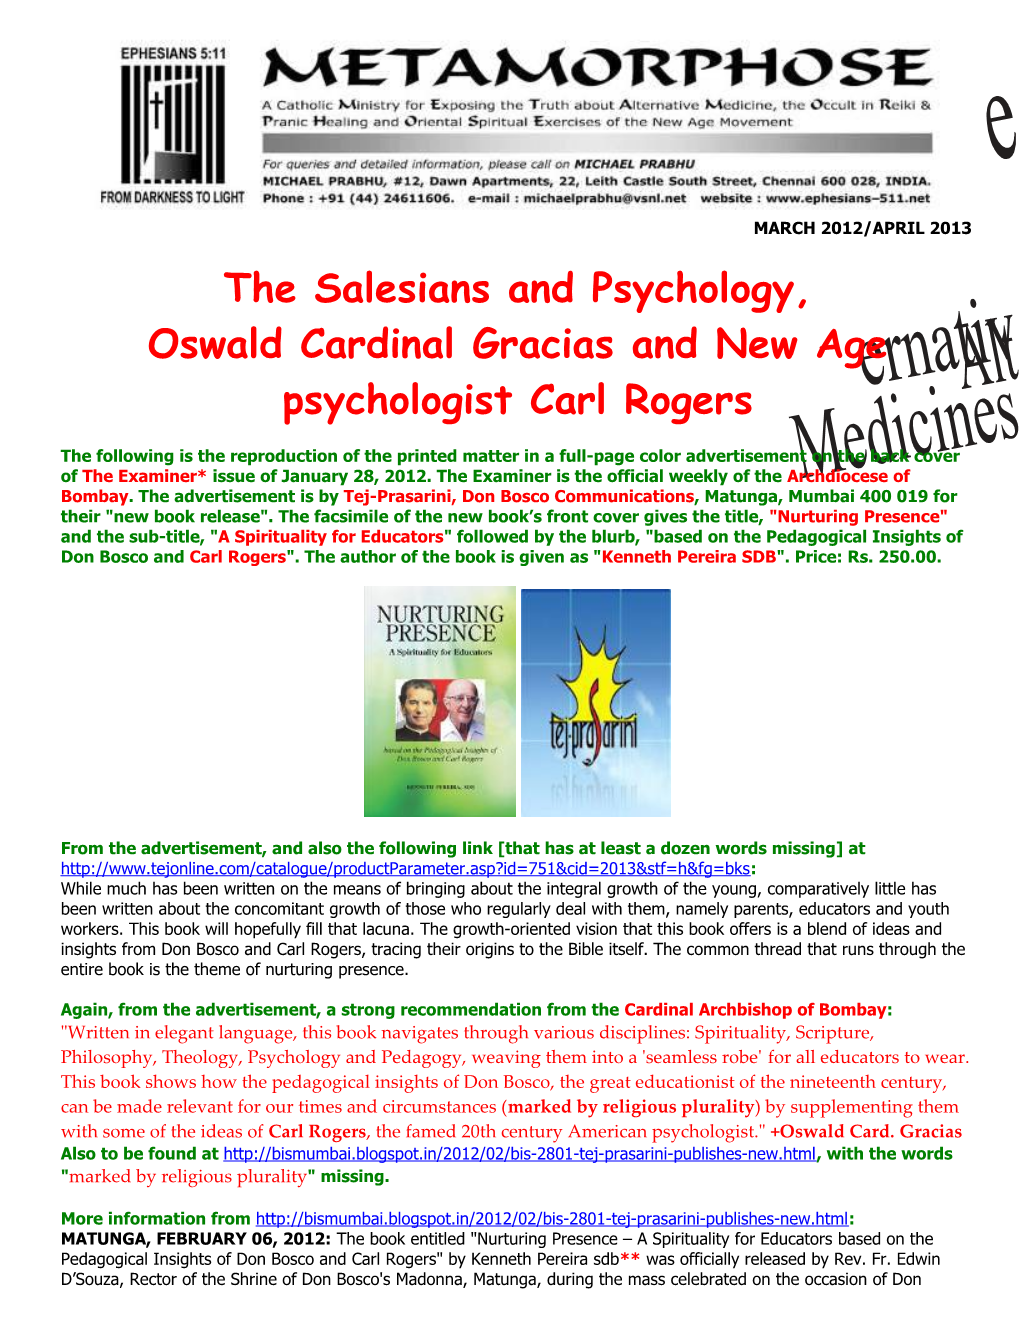 Oswald Cardinal Gracias and New Age Psychologist Carl Rogers